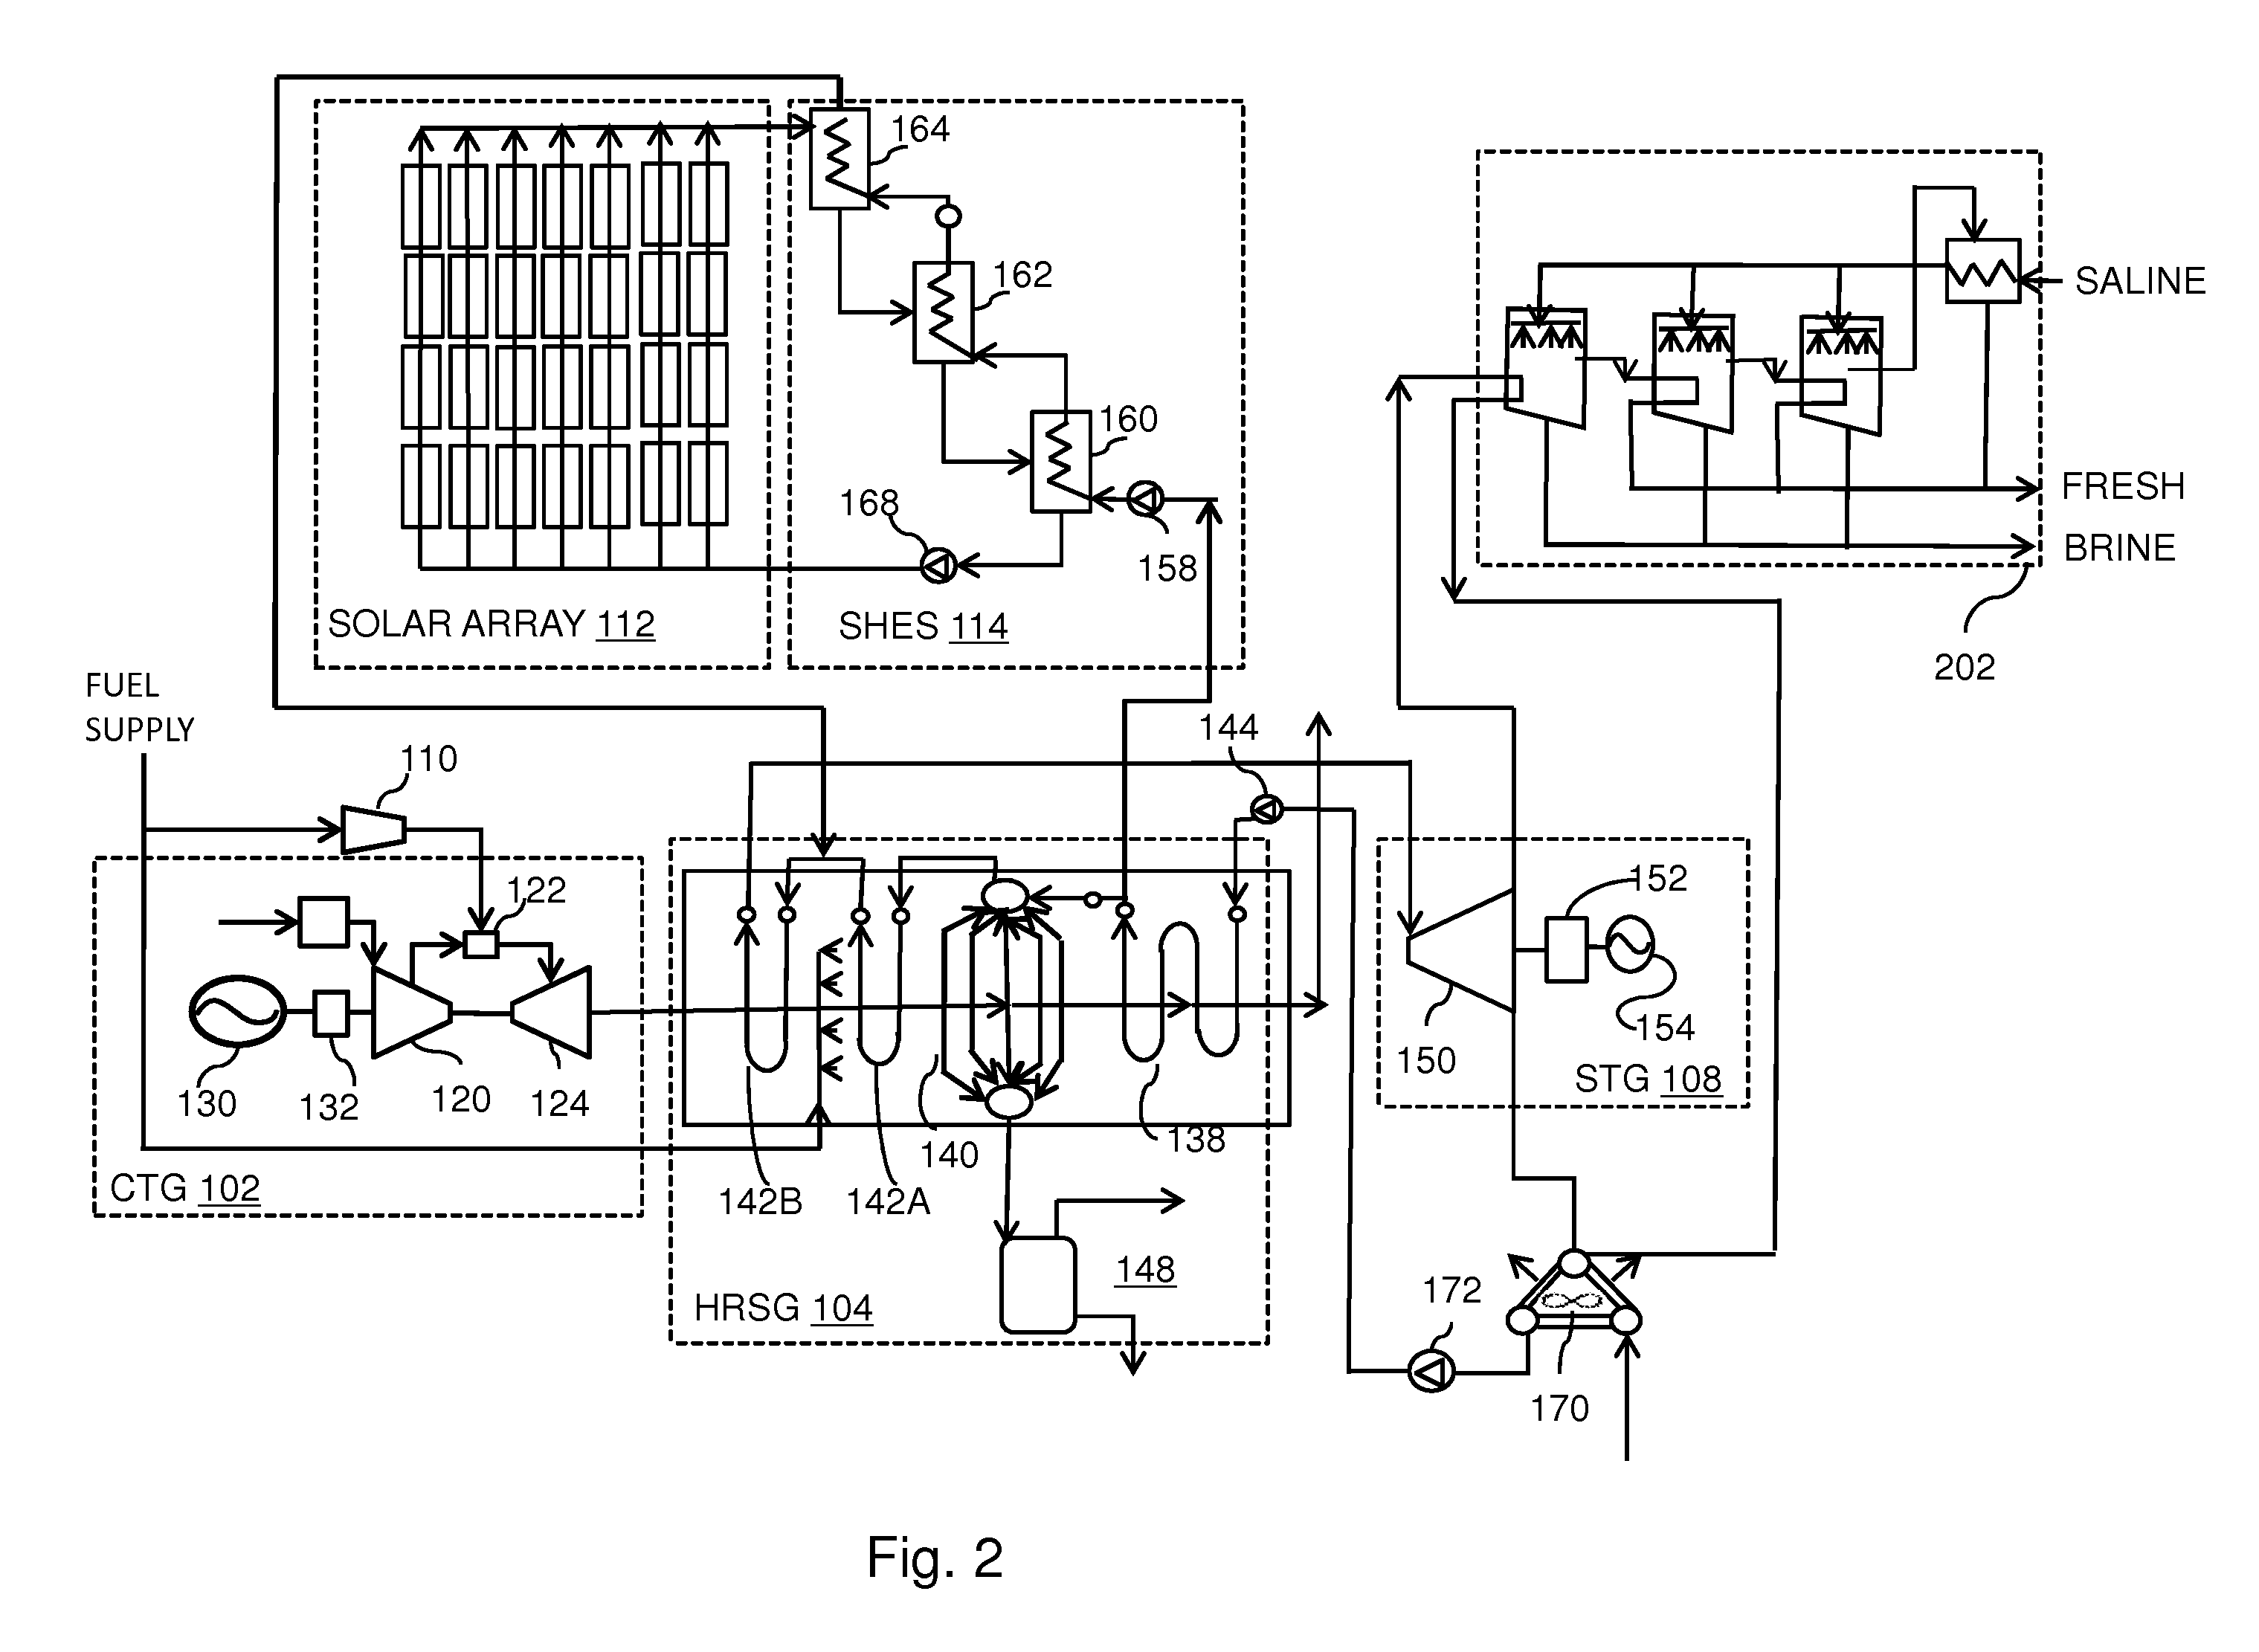 Solar heating of working fluid in a concentrated solar power-enabled power plant